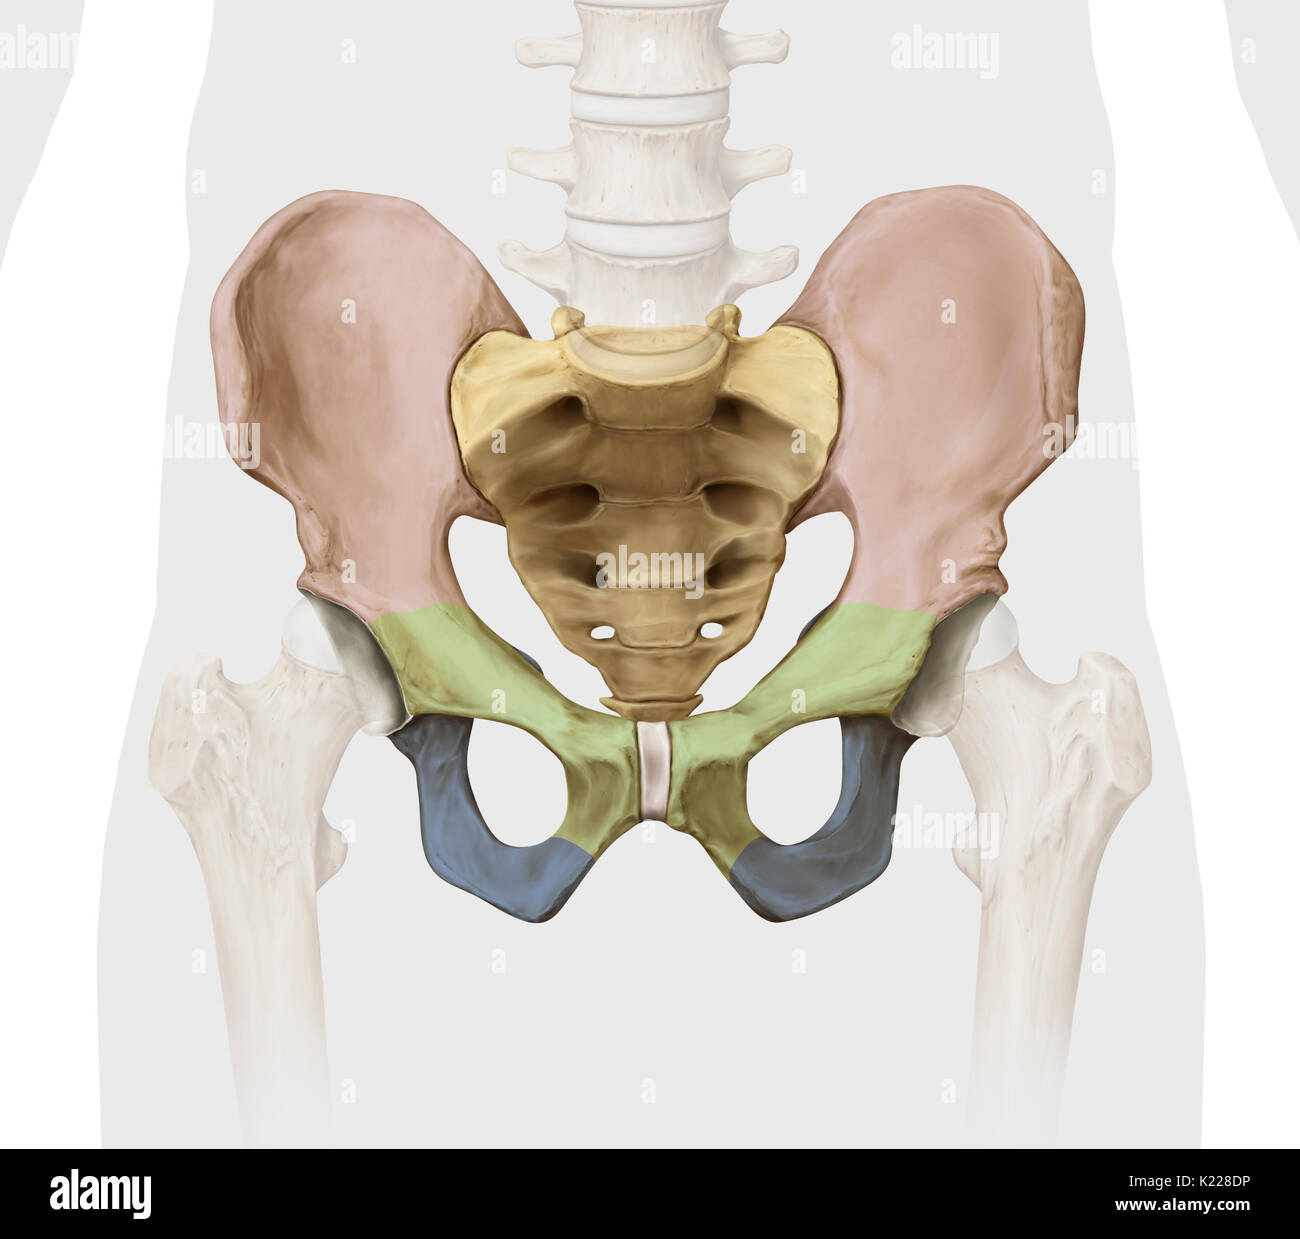 Bony girdle consisting of the sacrum, coccyx and two iliac bones, joining the bones of the lower limbs to the axial skeleton. Stock Photo